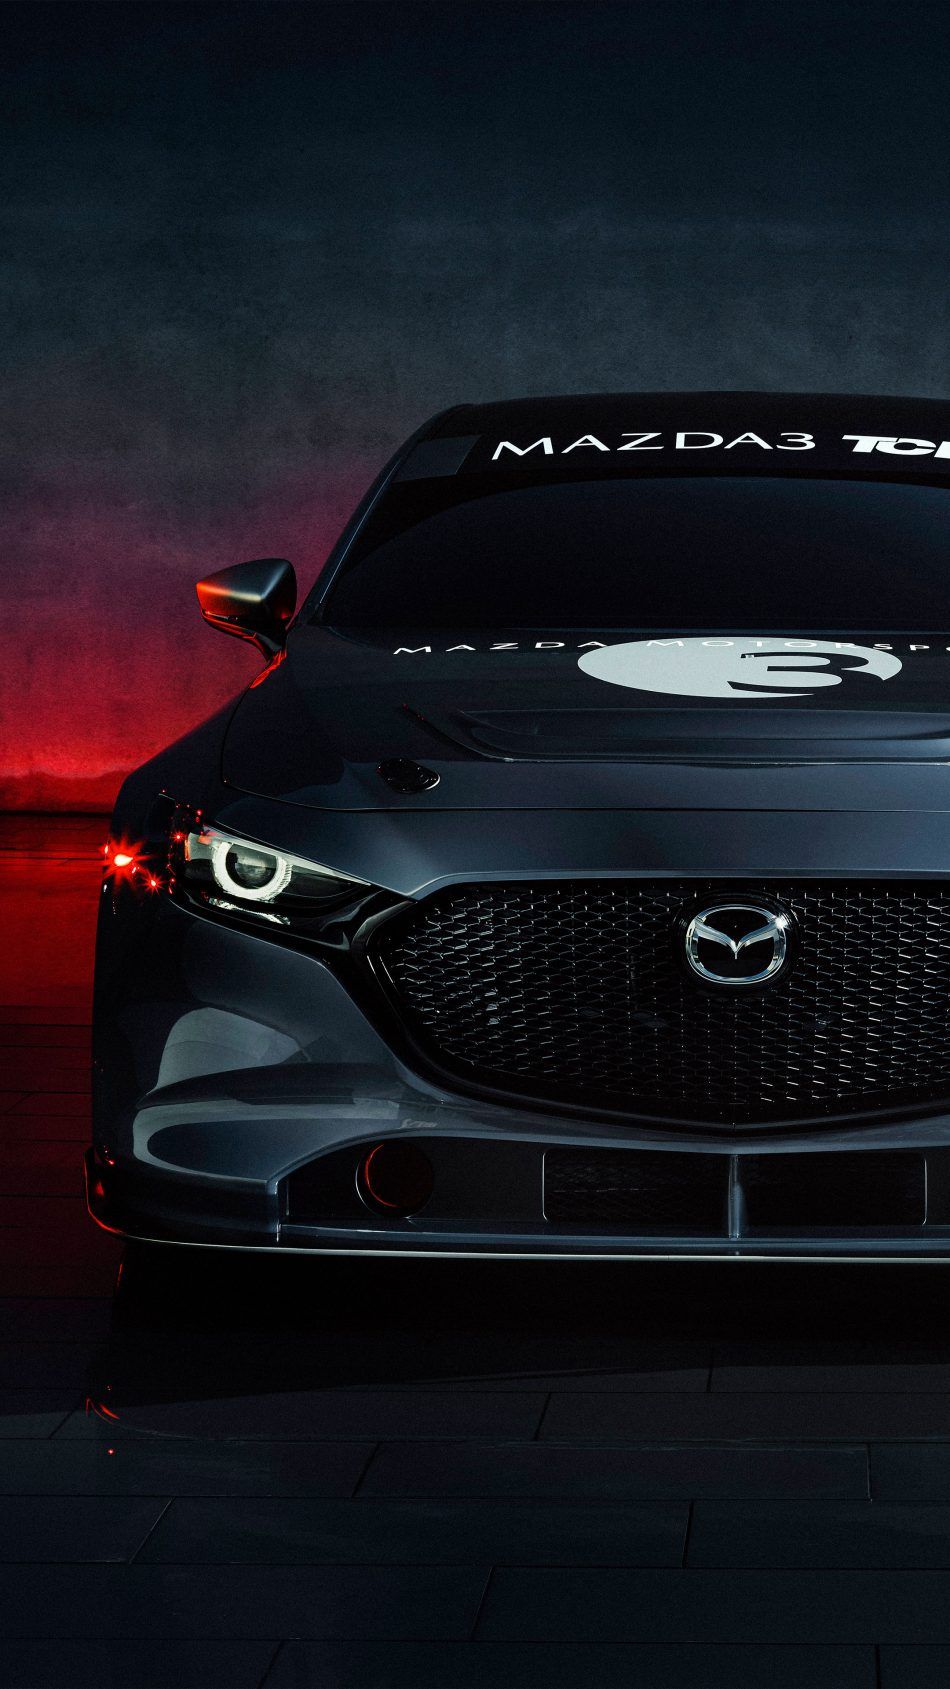 Top Mazda Wallpaper Hd Download Wallpapers Book Your 1 Source For Free Download Hd 4k High Quality Wallpapers